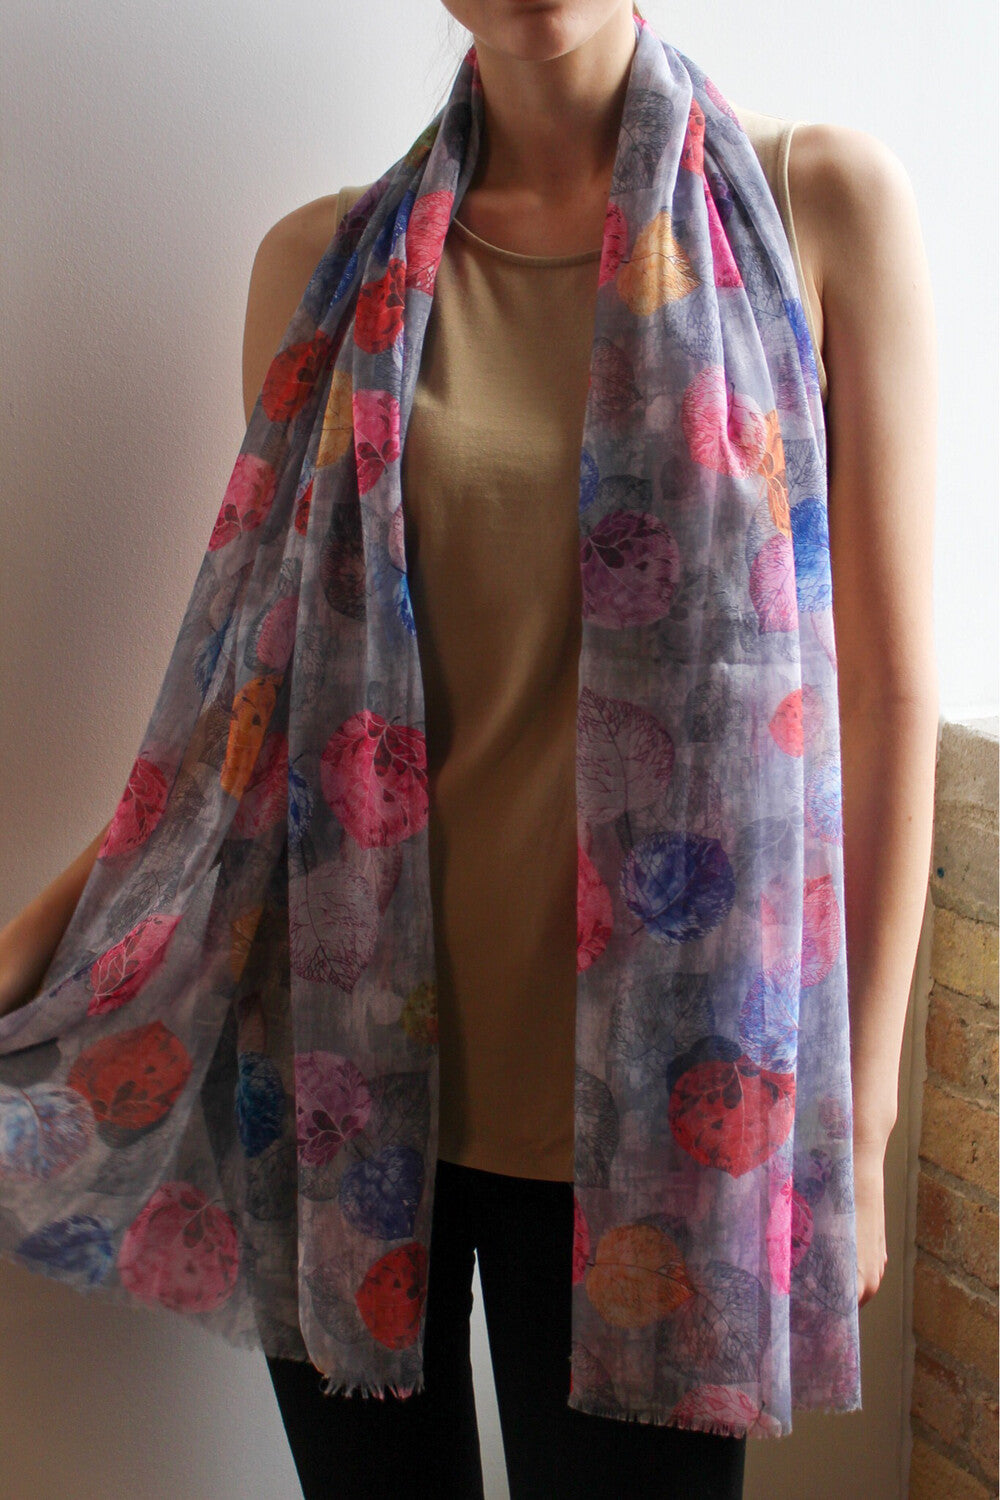 Scarf - Long with Frayed Edges - Multi-Coloured Leaves on Grey